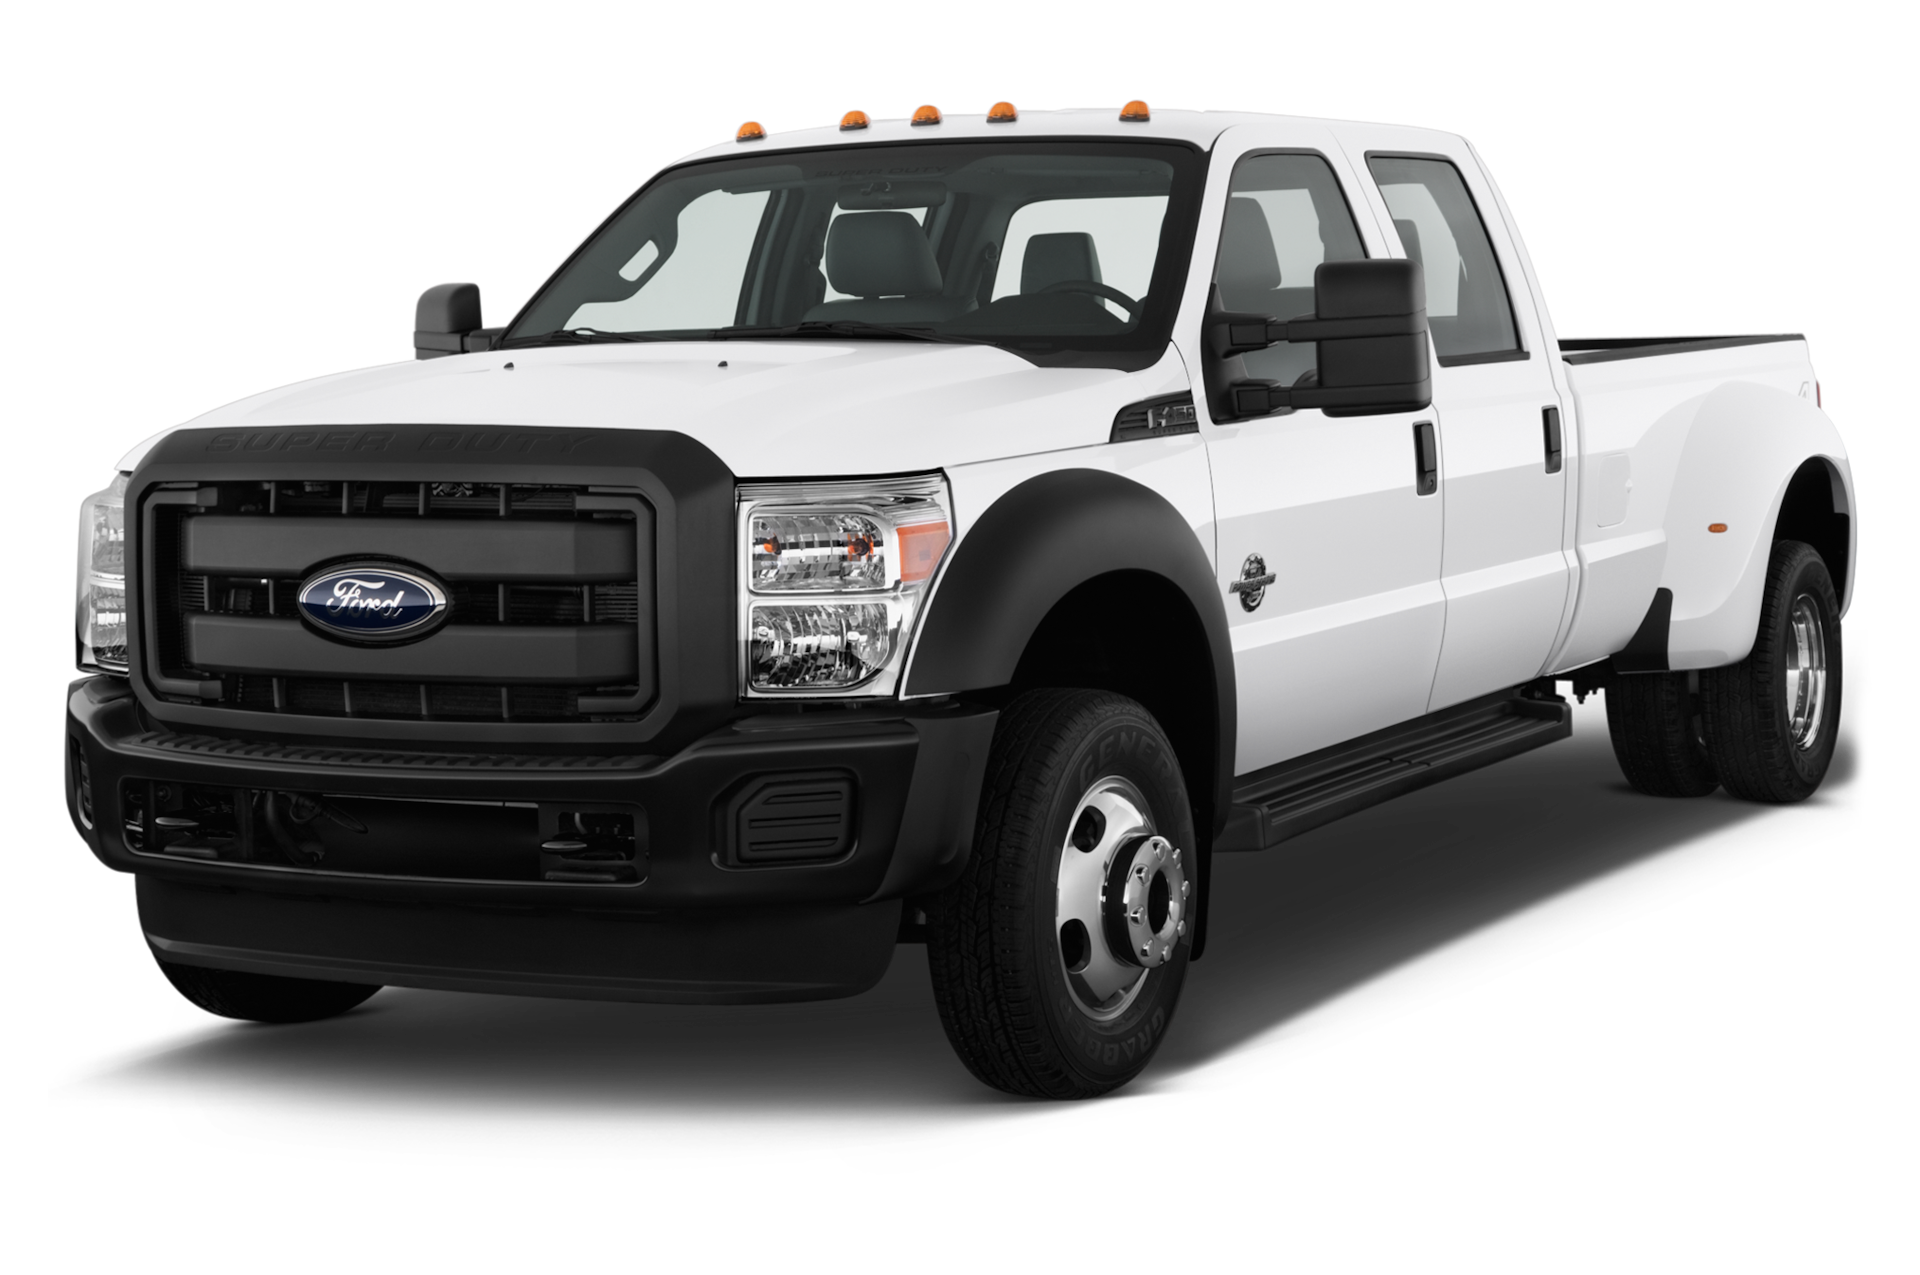 2012 Ford F-450 Prices, Reviews, and Photos - MotorTrend